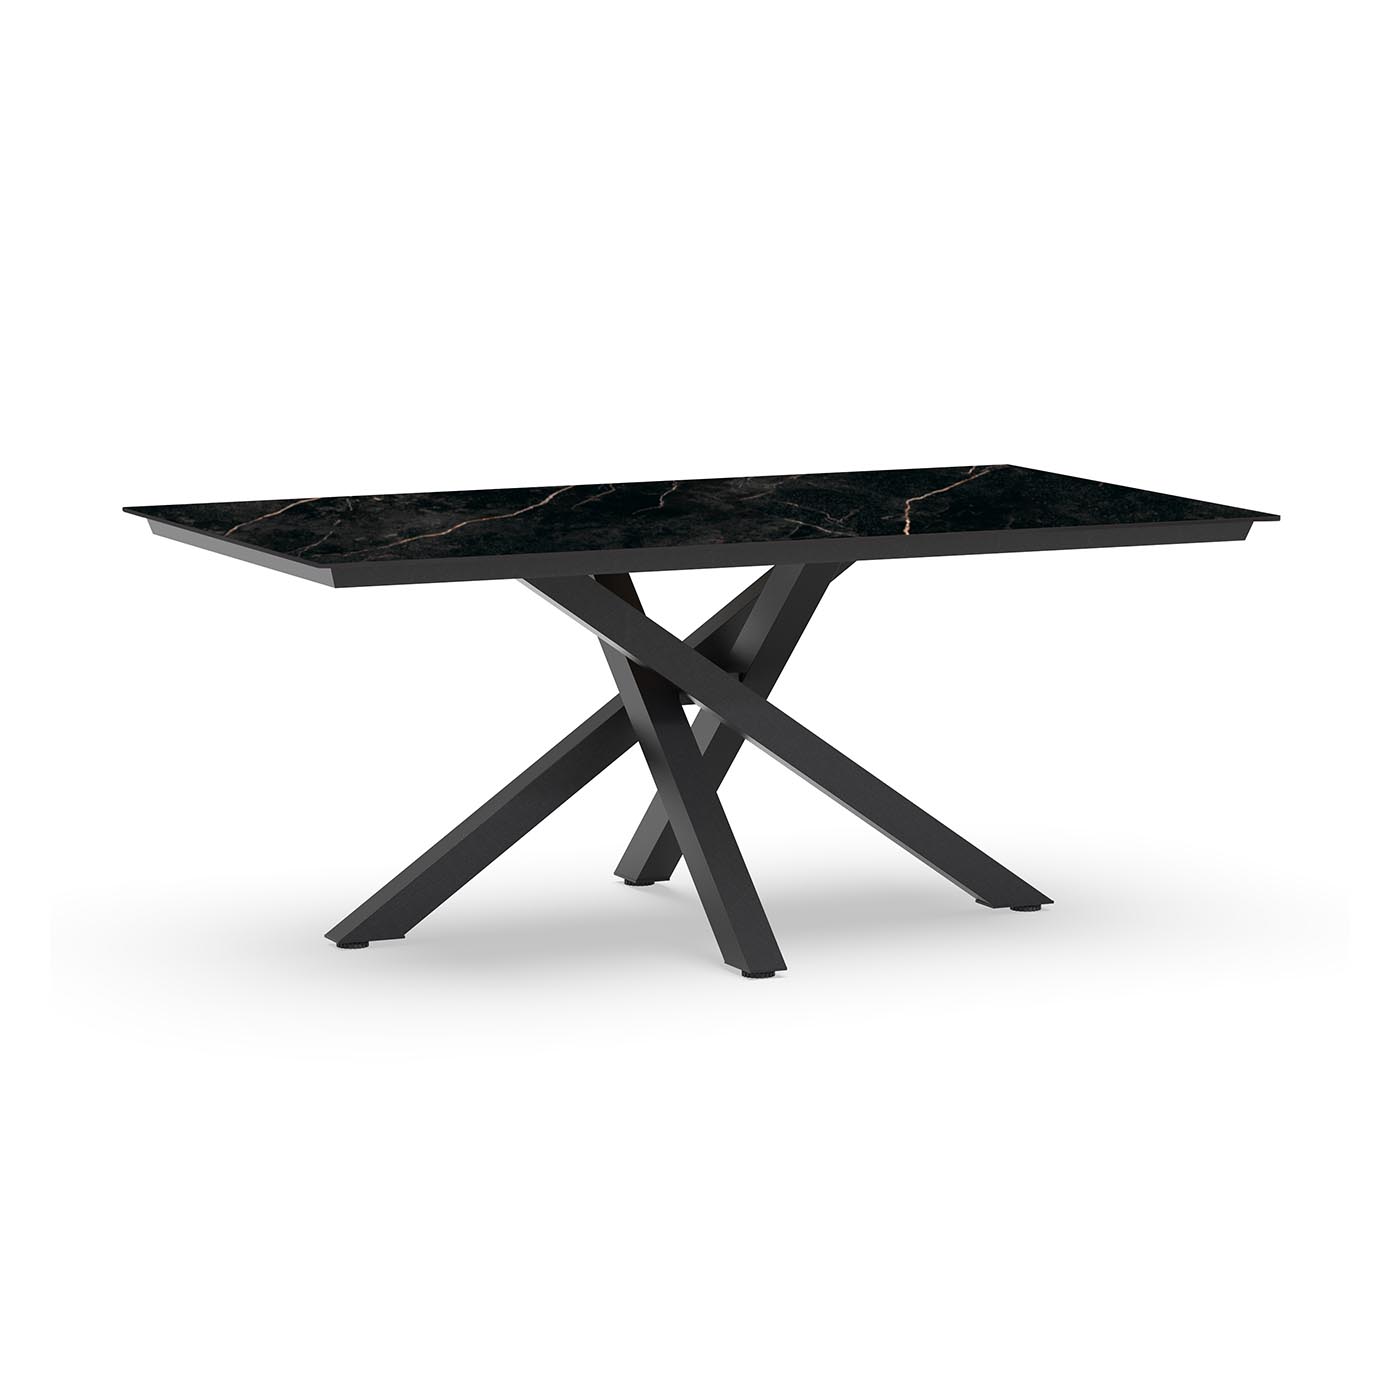 Orion Dining Table Trespa Marble 180 x 100 cm Charcoal